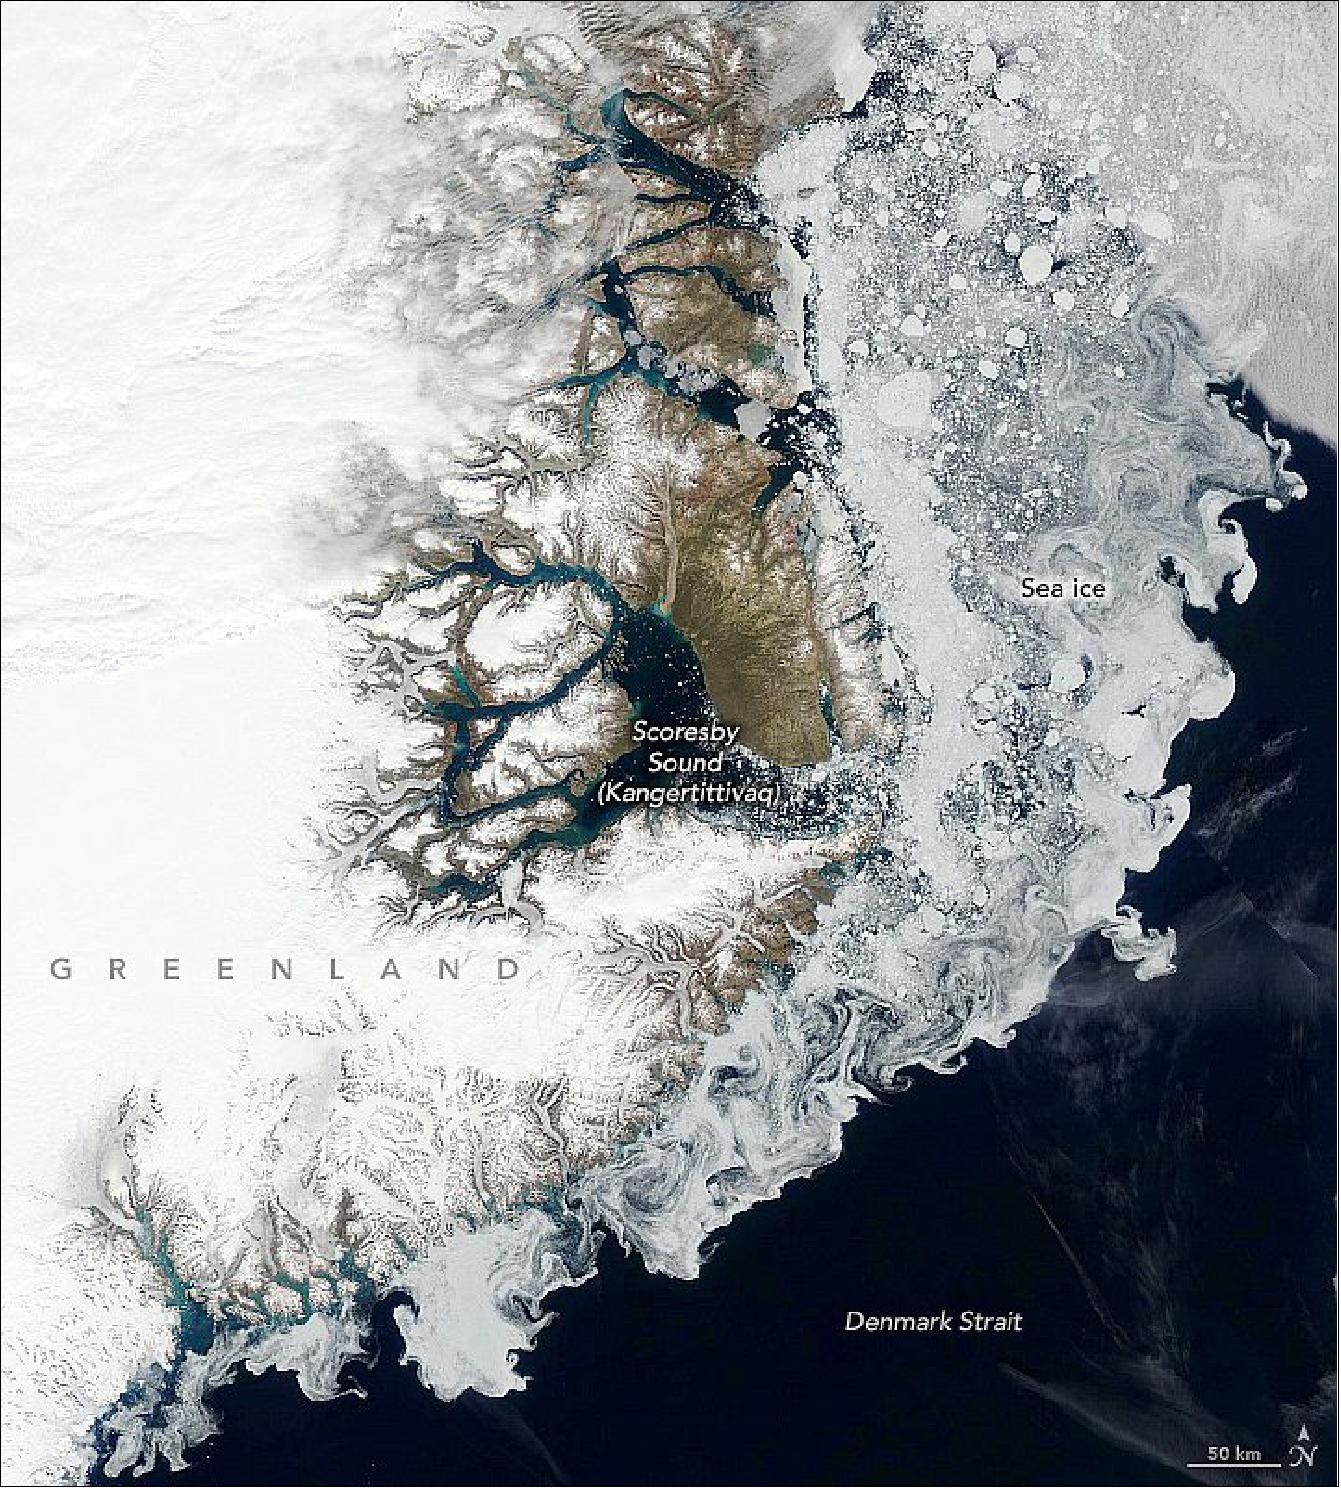 Figure 66: That's the origin of the sea ice pictured here. When satellites acquired these images in July 2020, the ice had drifted more than 1,000 km (600 miles) from the Arctic Ocean. The wide view above, acquired on July 2 with the Moderate Resolution Imaging Spectroradiometer (MODIS) on NASA's Aqua satellite, shows sea ice hugging the coast of East Greenland (image credit: NASA Earth Observatory images by Lauren Dauphin, using MODIS data from NASA EOSDIS/LANCE and GIBS/Worldview and Landsat data from USGS, story by Kathryn Hansen)